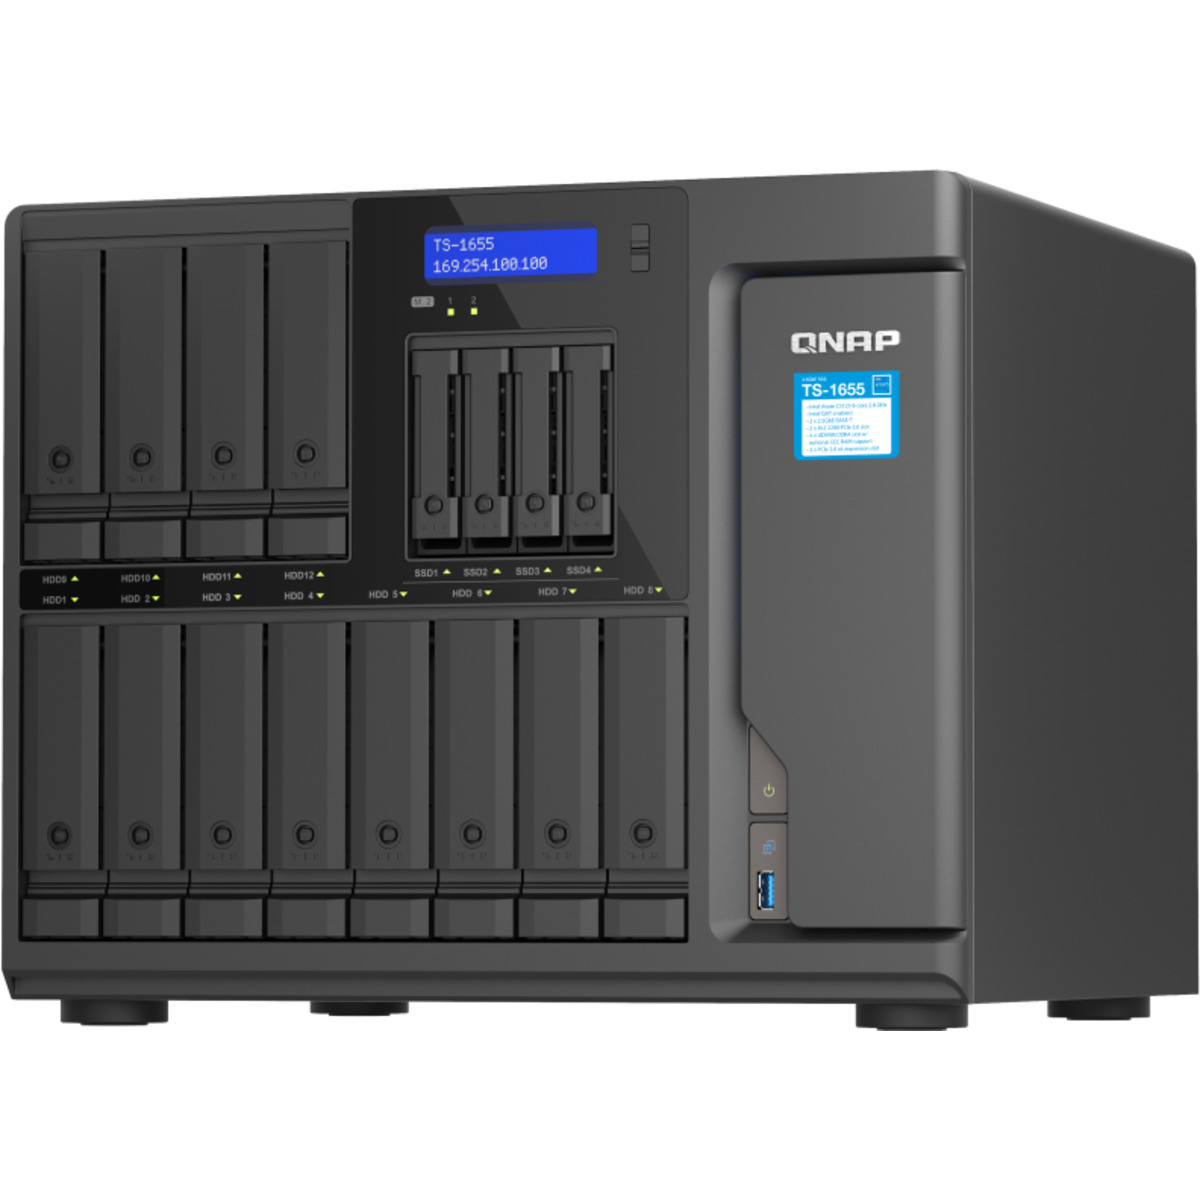 buy $5229 QNAP TS-1655 24tb Desktop NAS - Network Attached Storage Device 12x2000gb Western Digital Red SA500 WDS200T1R0A 2.5 560/530MB/s SATA 6Gb/s SSD NAS Class Drives Installed - Burn-In Tested - FREE RAM UPGRADE - nas headquarters buy network attached storage server device das new raid-5 free shipping usa TS-1655